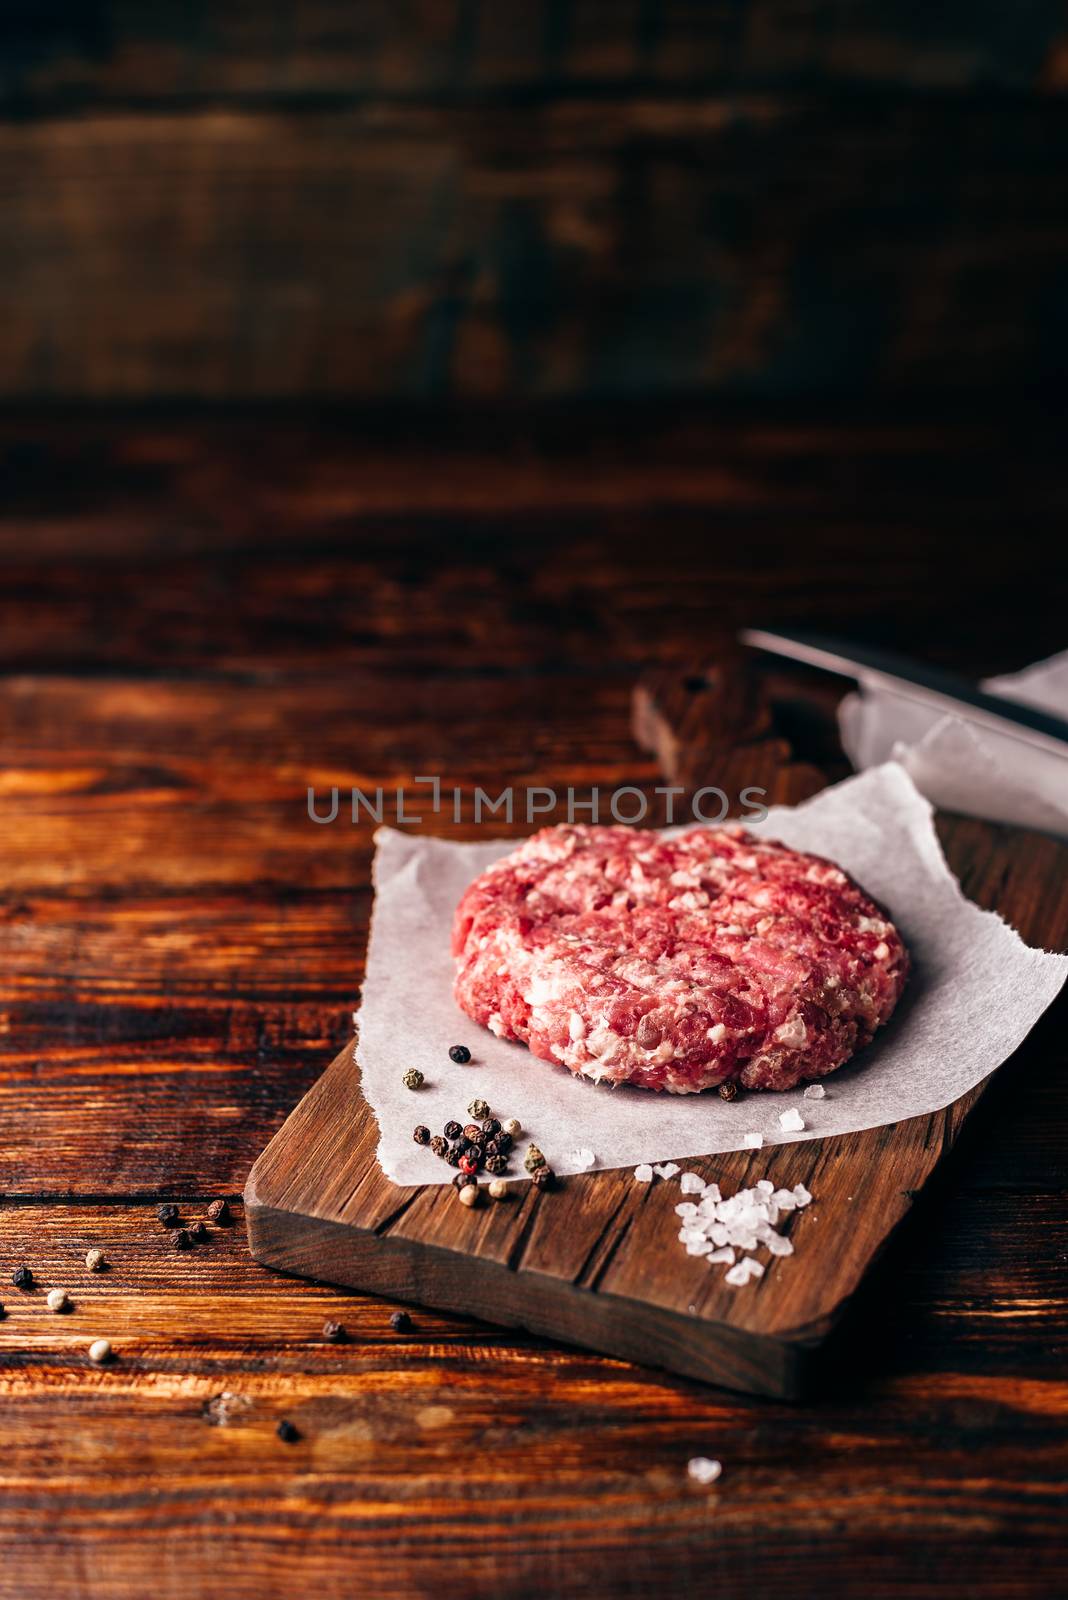 Raw Pork Patty with Spices on Cutting Board for Burger. Vertical Orientation and Copy Space.